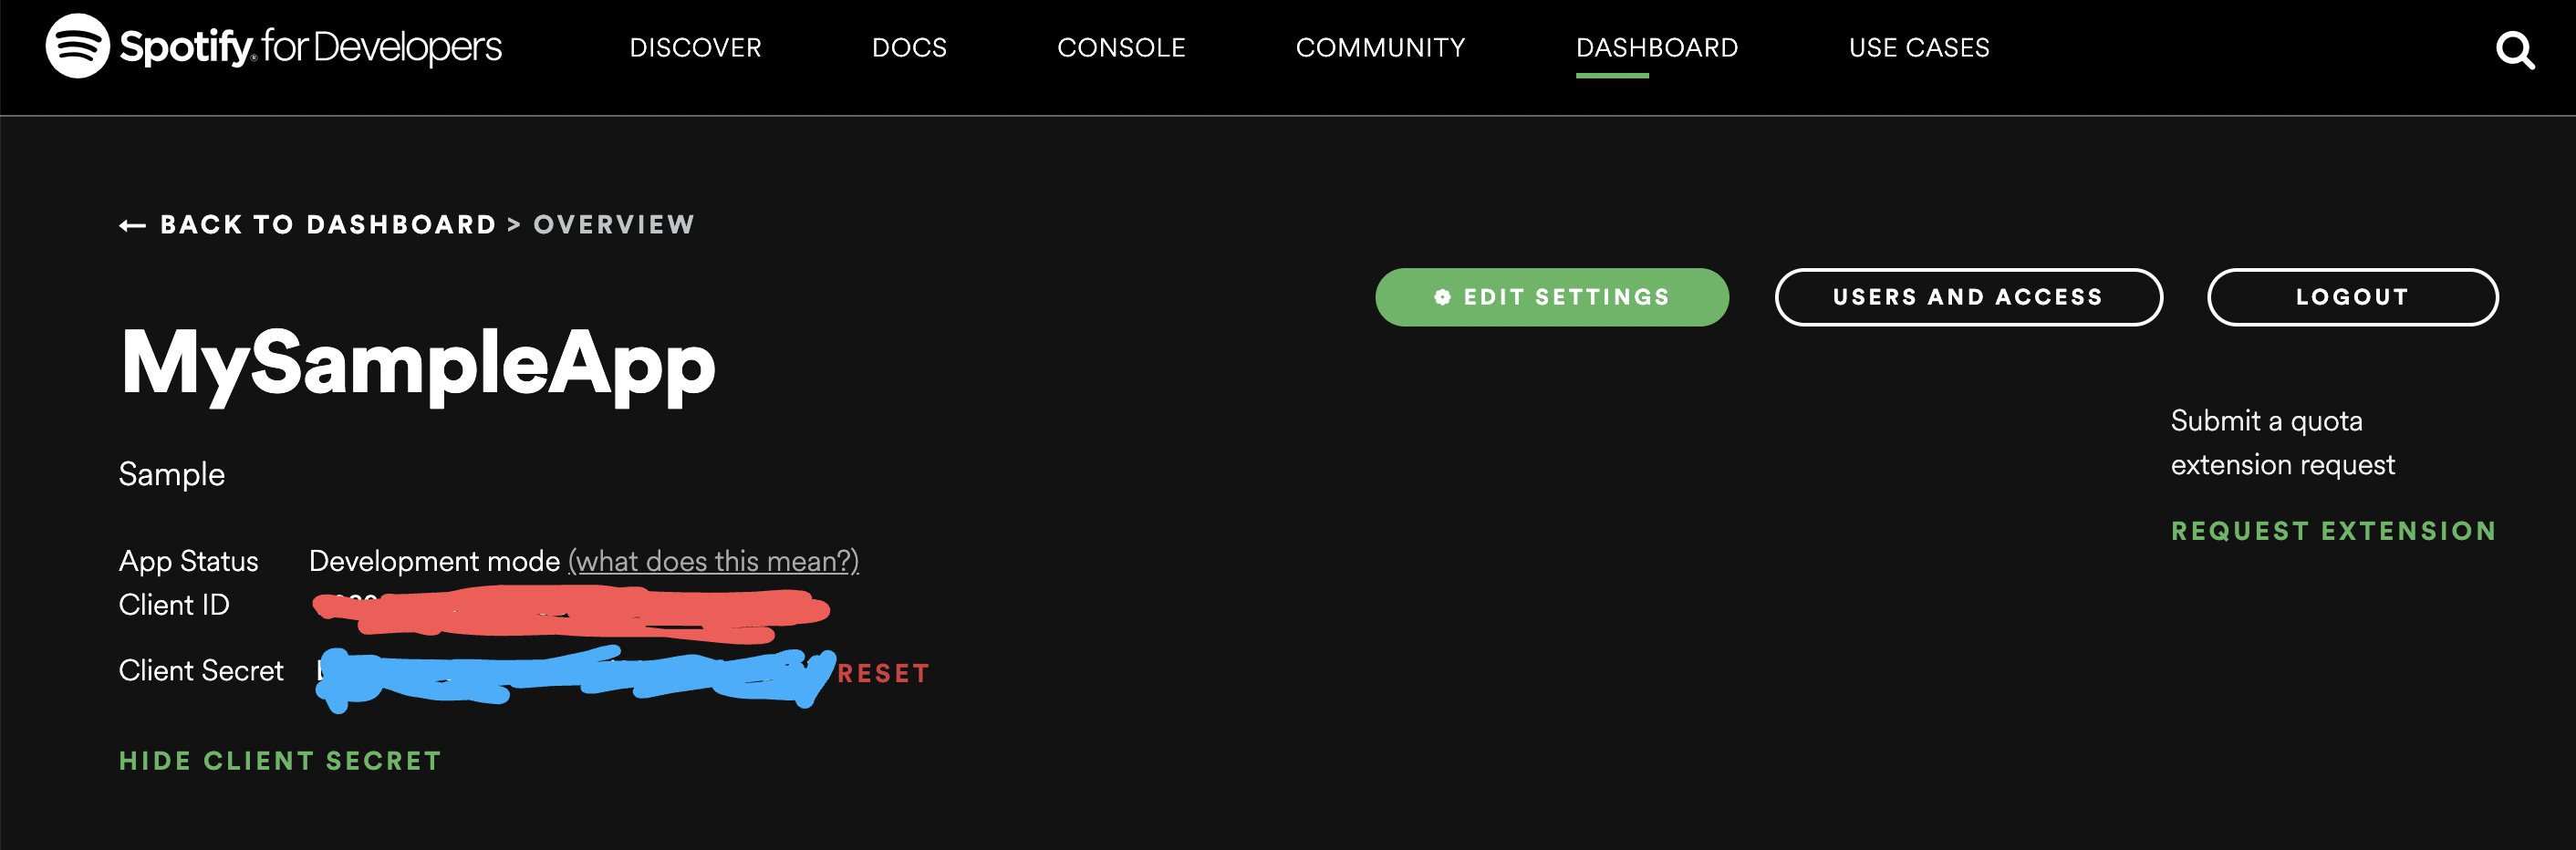 Spotify for Developersの画面